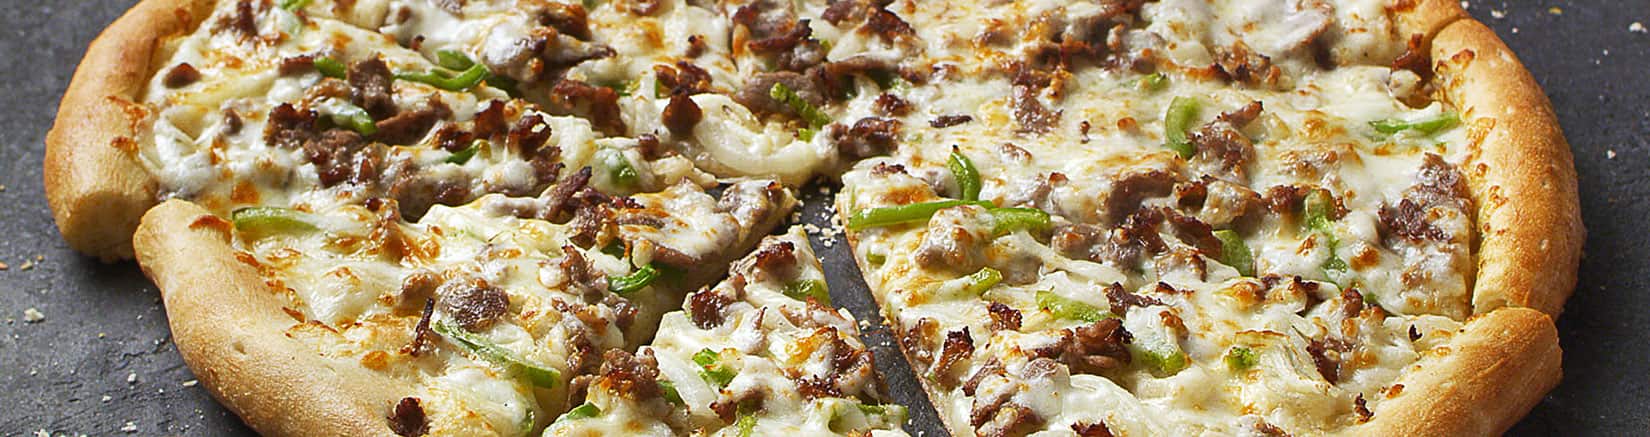 Philly Cheesesteak Pizza Delivery Near Me - Best Philly Cheesesteak Pizza Toppings & Ingredients ...